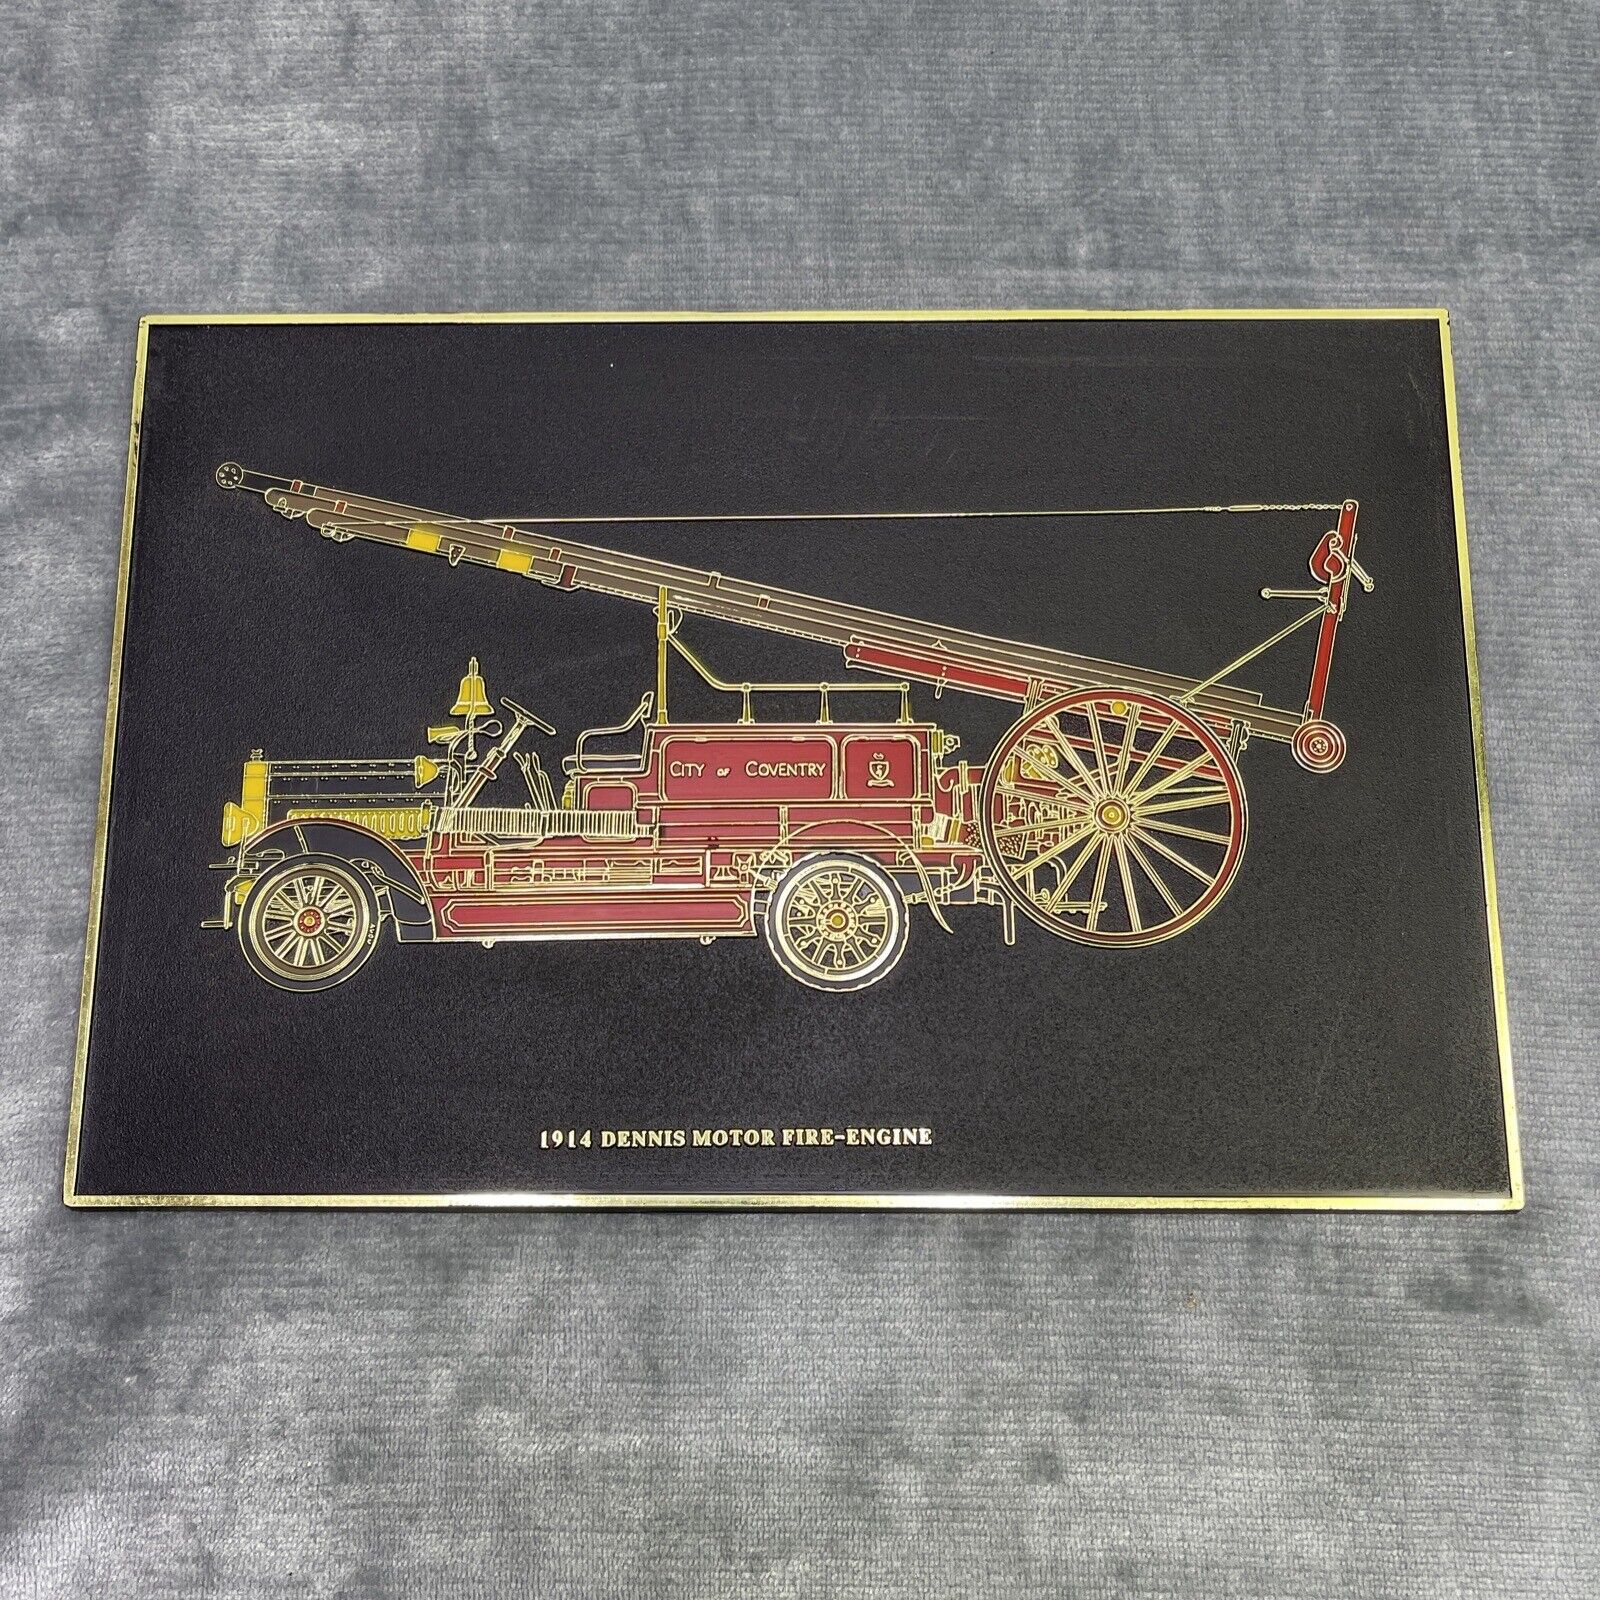 VINTAGE Plastic Sign 1914 Dennis Motor Fire Engine City Of Coventry Fire Truck